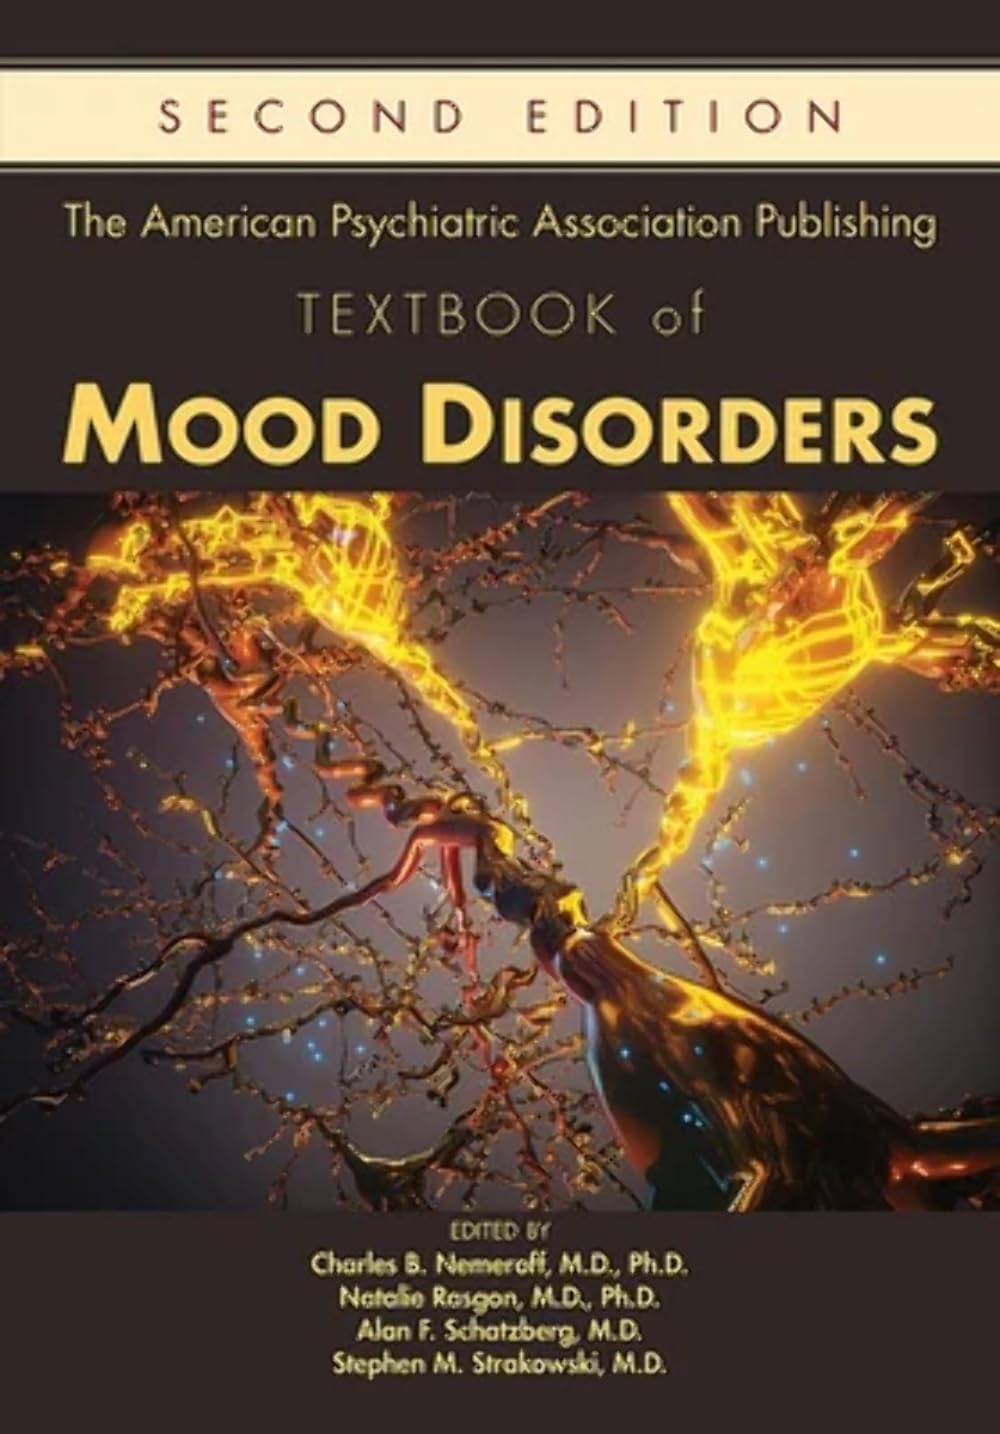 The American Psychiatric Association Publishing Textbook of Mood Disorders, 2nd Edition  by Charles B. Nemeroff MD PhD 